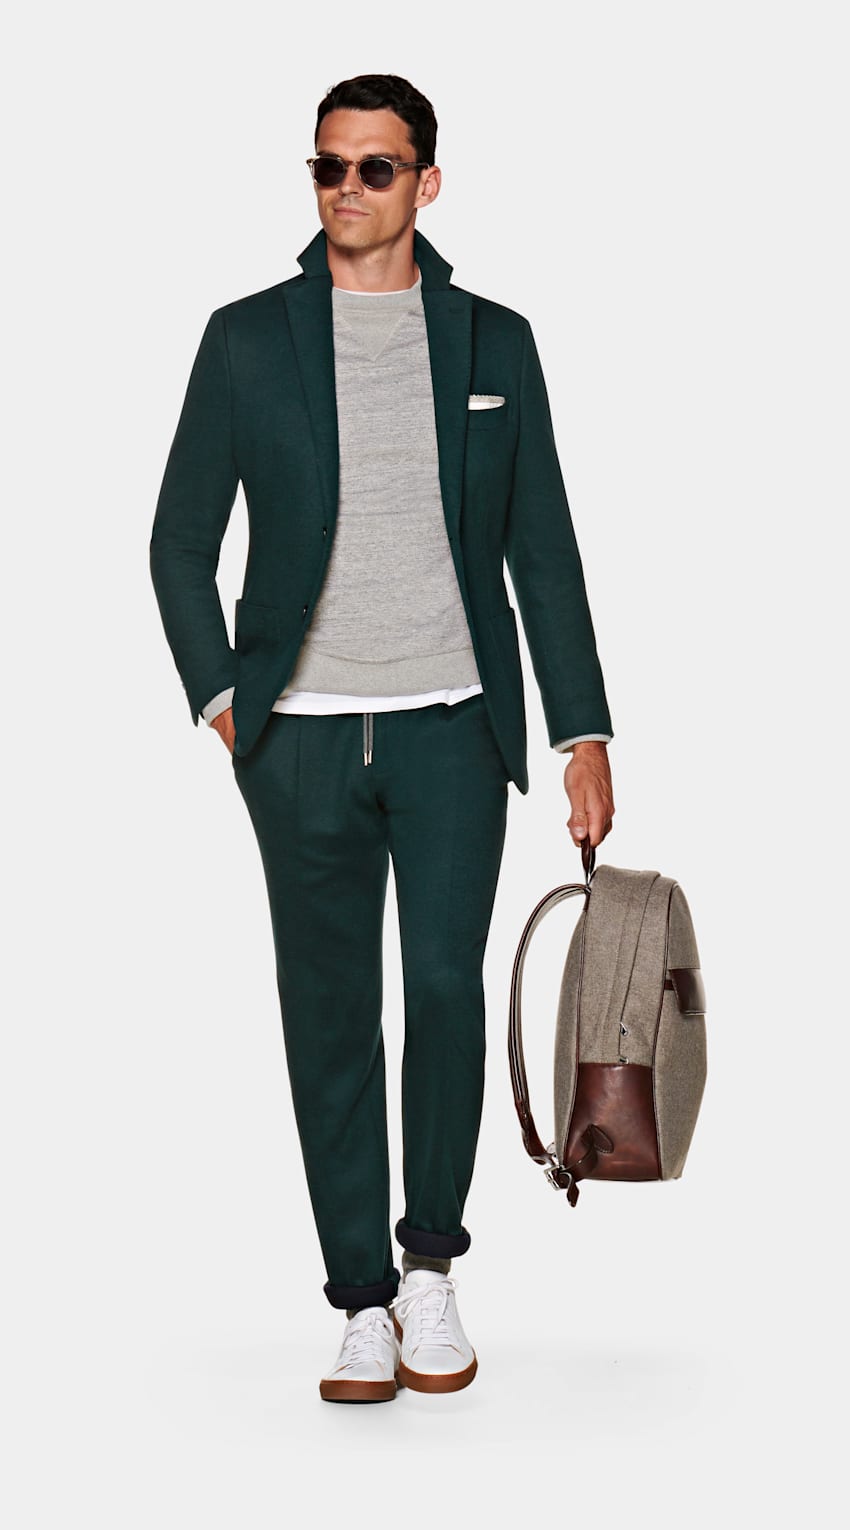 SUITSUPPLY  by Leomaster, Italy Havana Green Suit